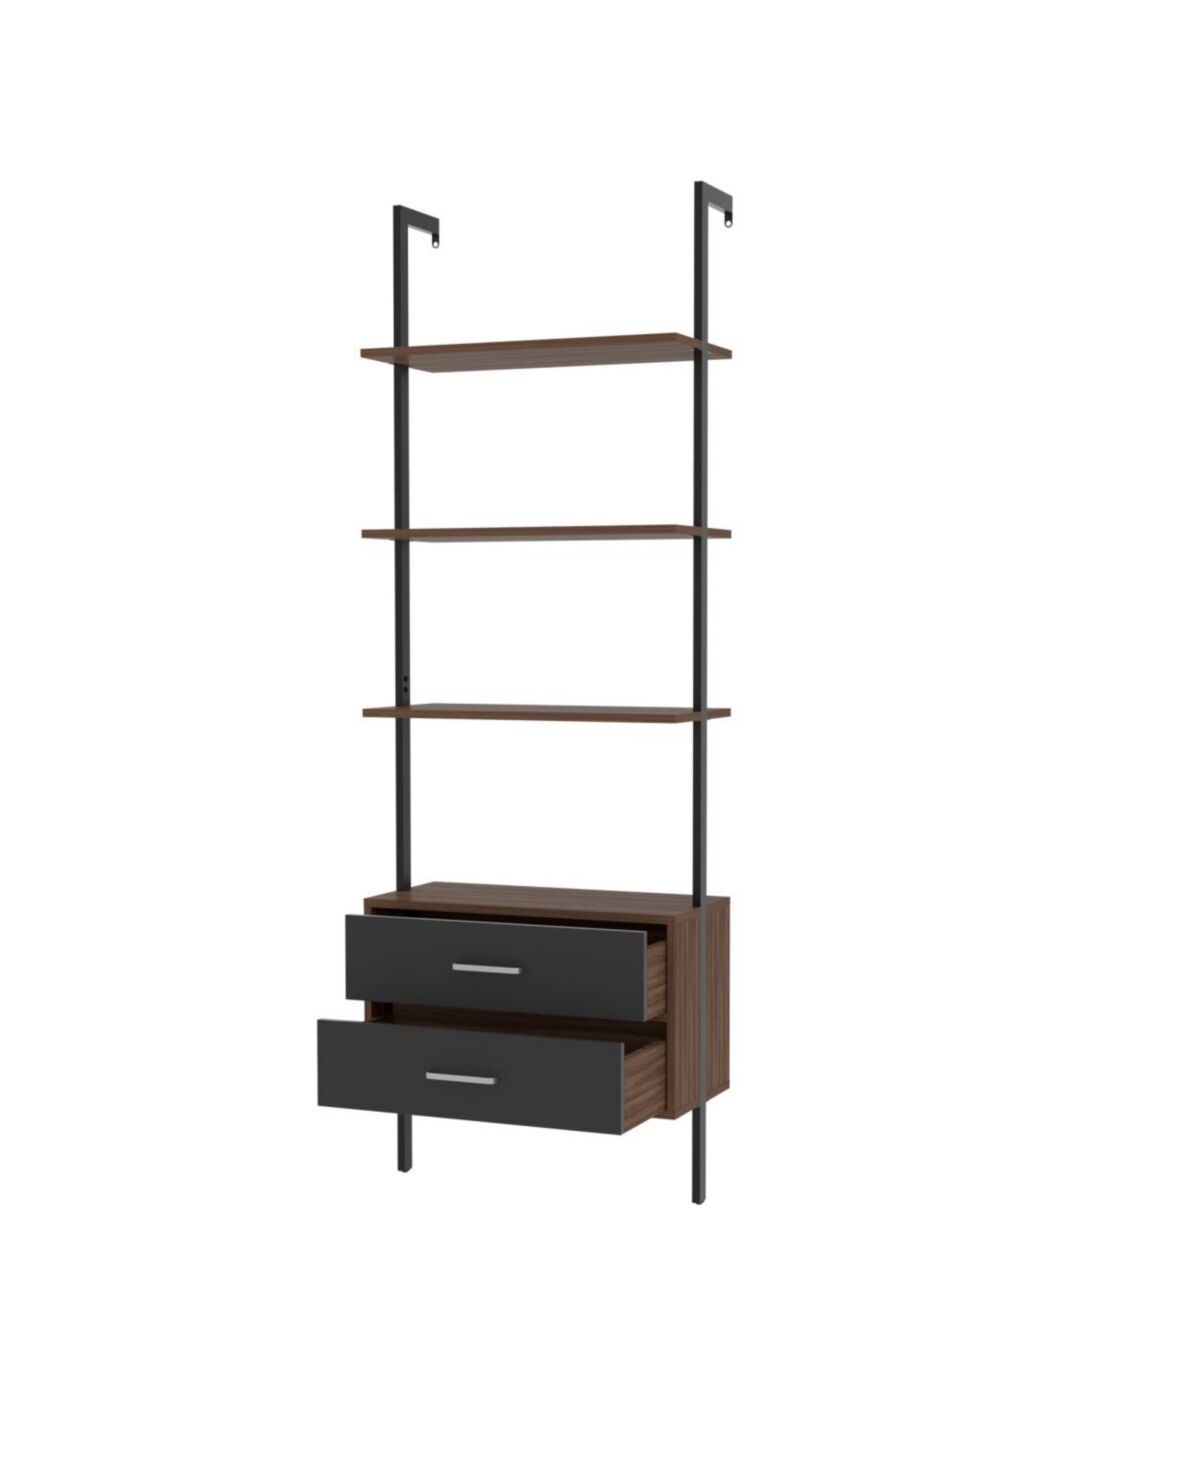 Simplie Fun Ladder Bookcase, Vertical open space shelf with 2 drawers, office bookshelf wall mount required (walnut),provides storage for artwork, decorative figu